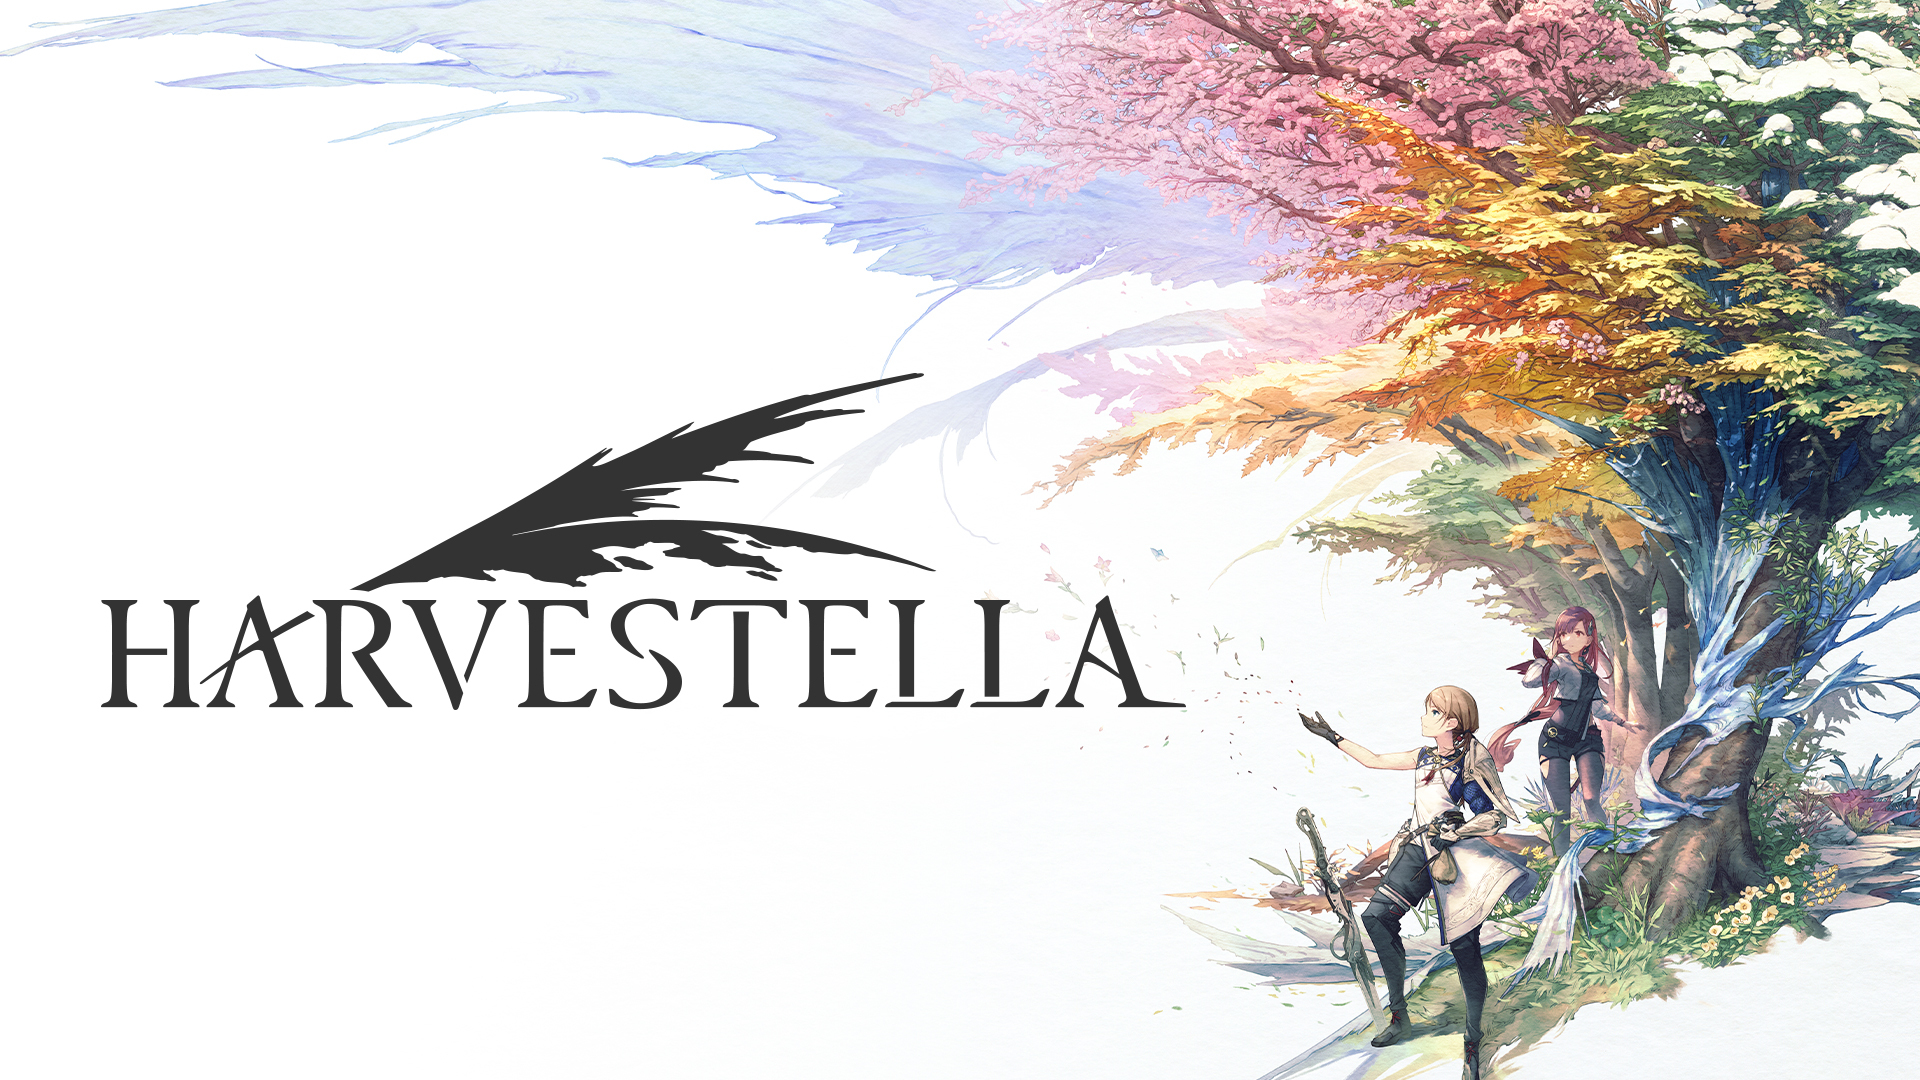 Metacritic - HARVESTELLA [Switch - 76] reviews are filtering in now:   An incredible game.  Everything about it just clicks, delivering a farm sim/JRPG hybrid  experience that I hope never ends. 